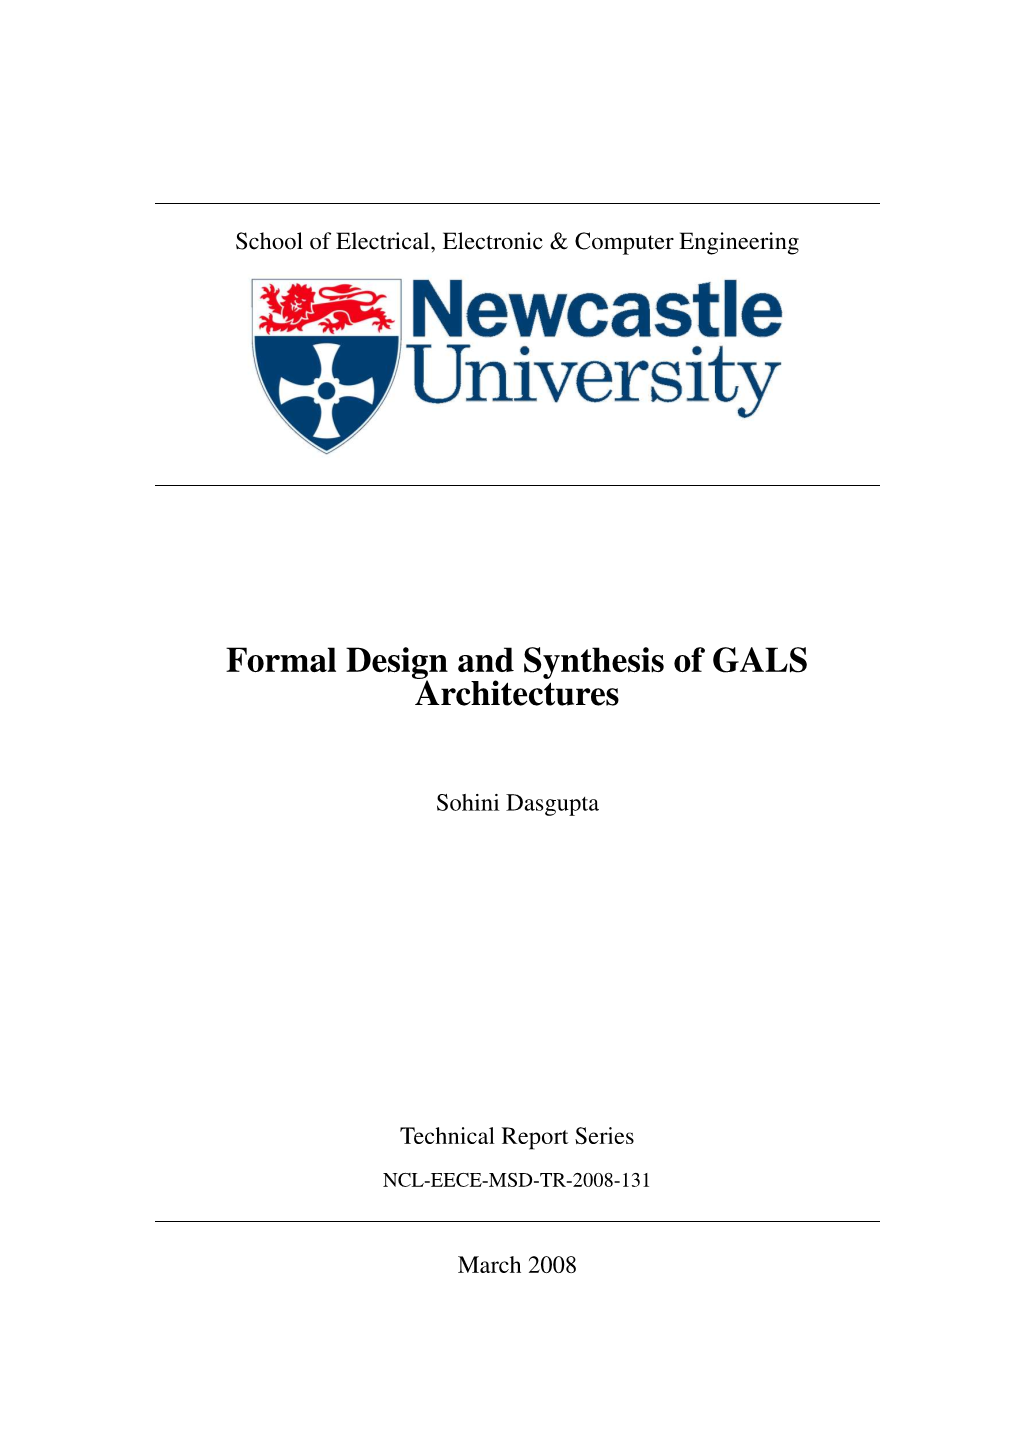 Formal Design and Synthesis of GALS Architectures